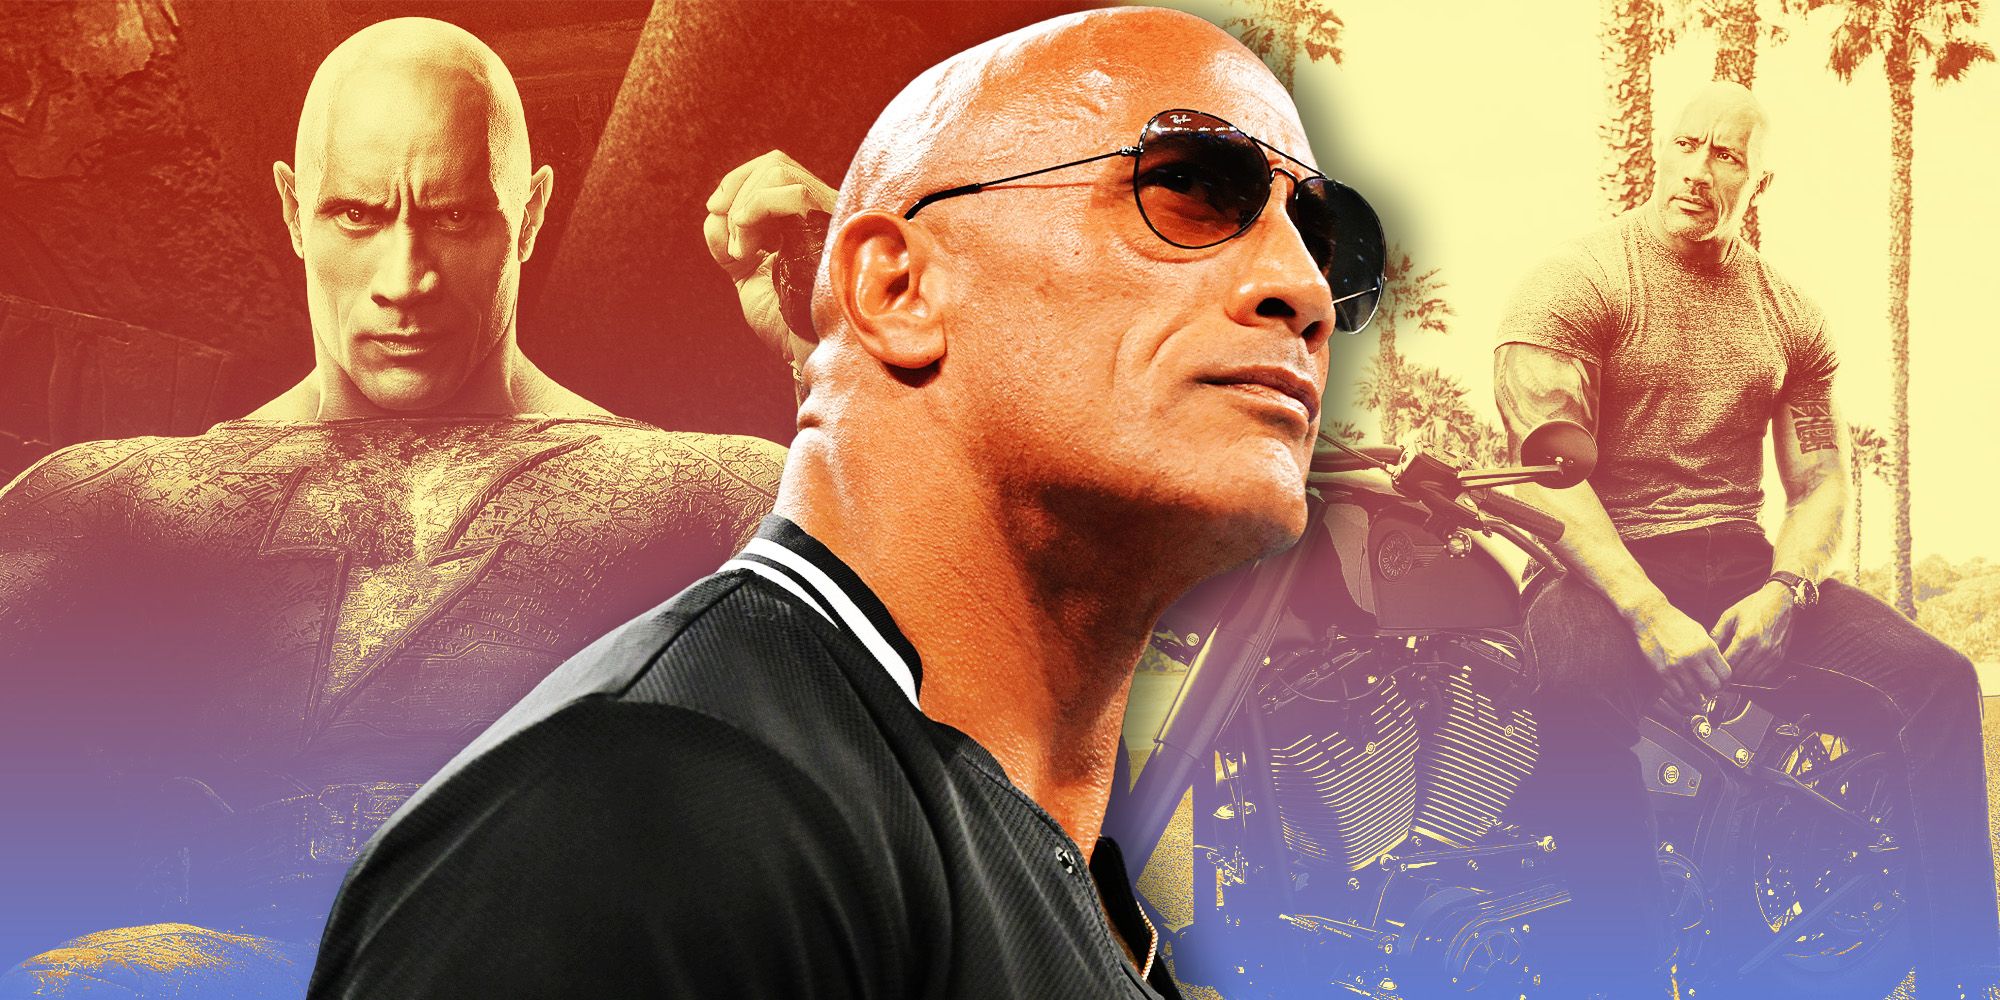 Dwayne The Rock Johnson Explains Staying With WWE Instead Of Pursuing MMA  Career